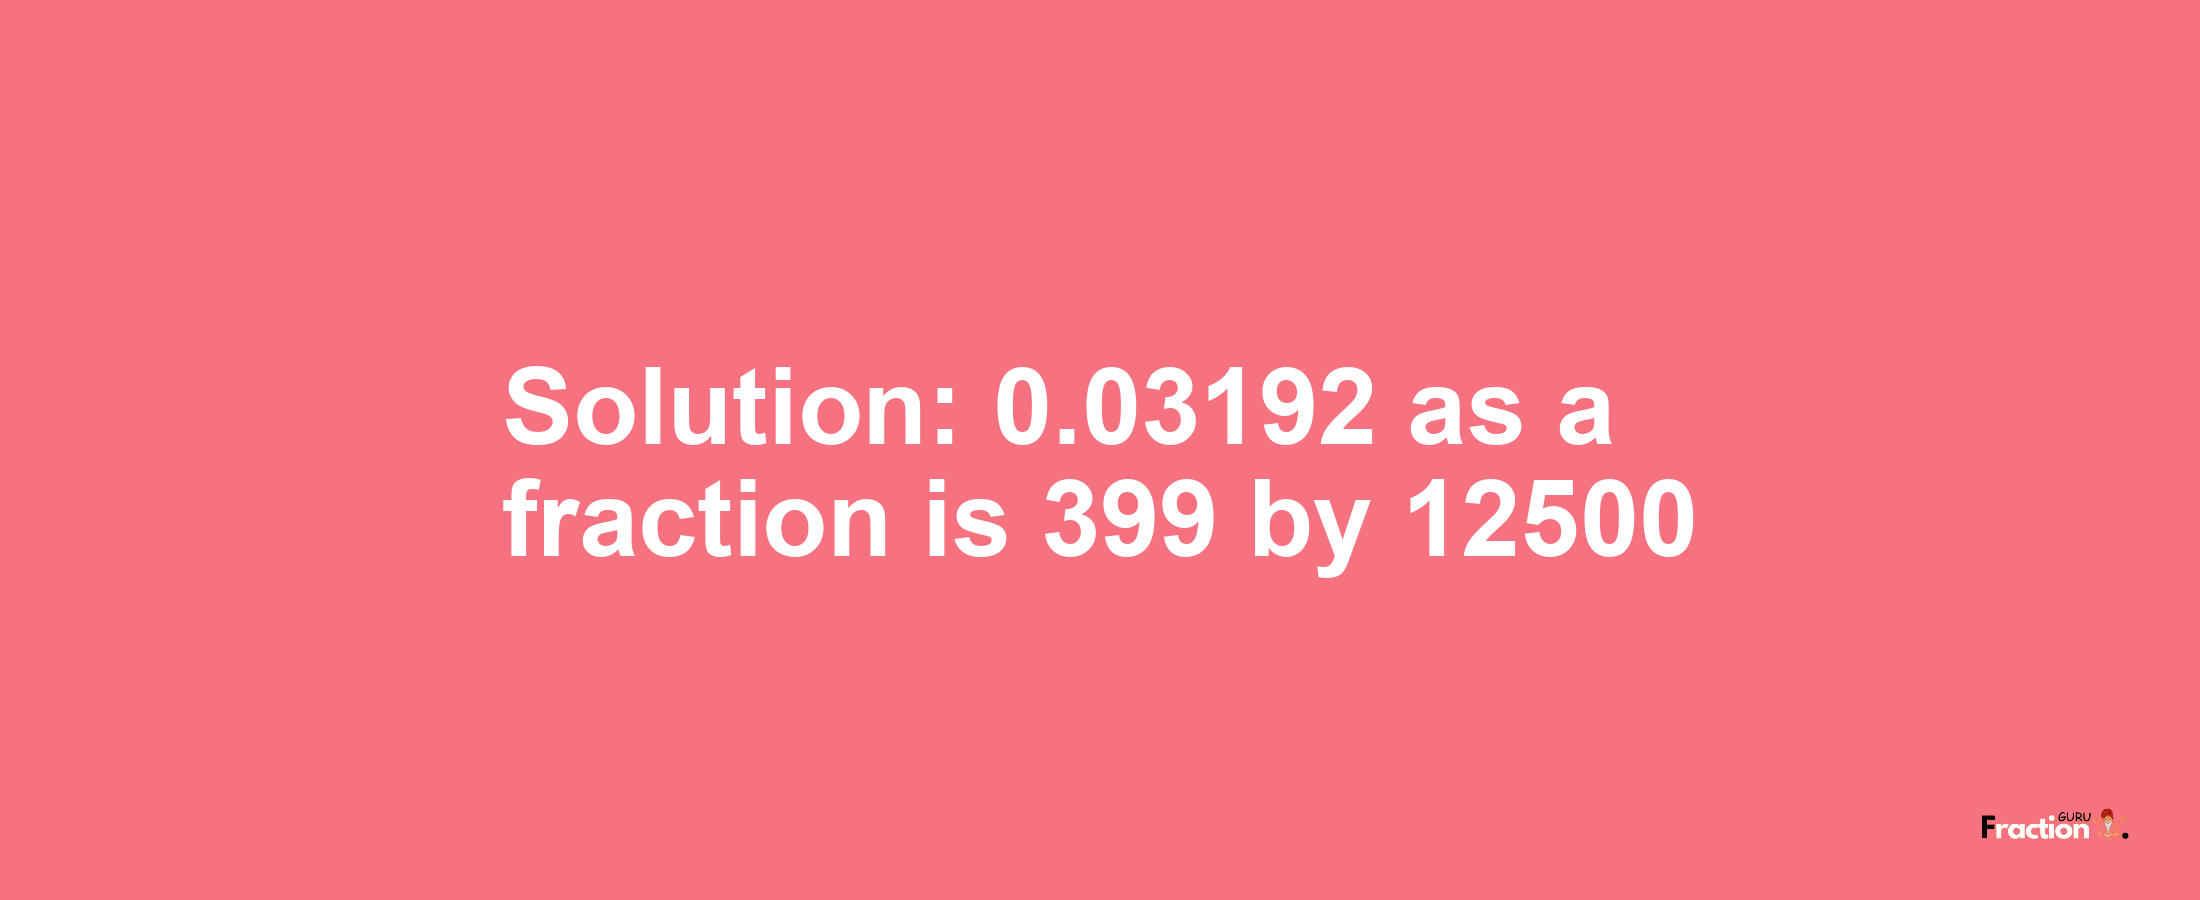 Solution:0.03192 as a fraction is 399/12500